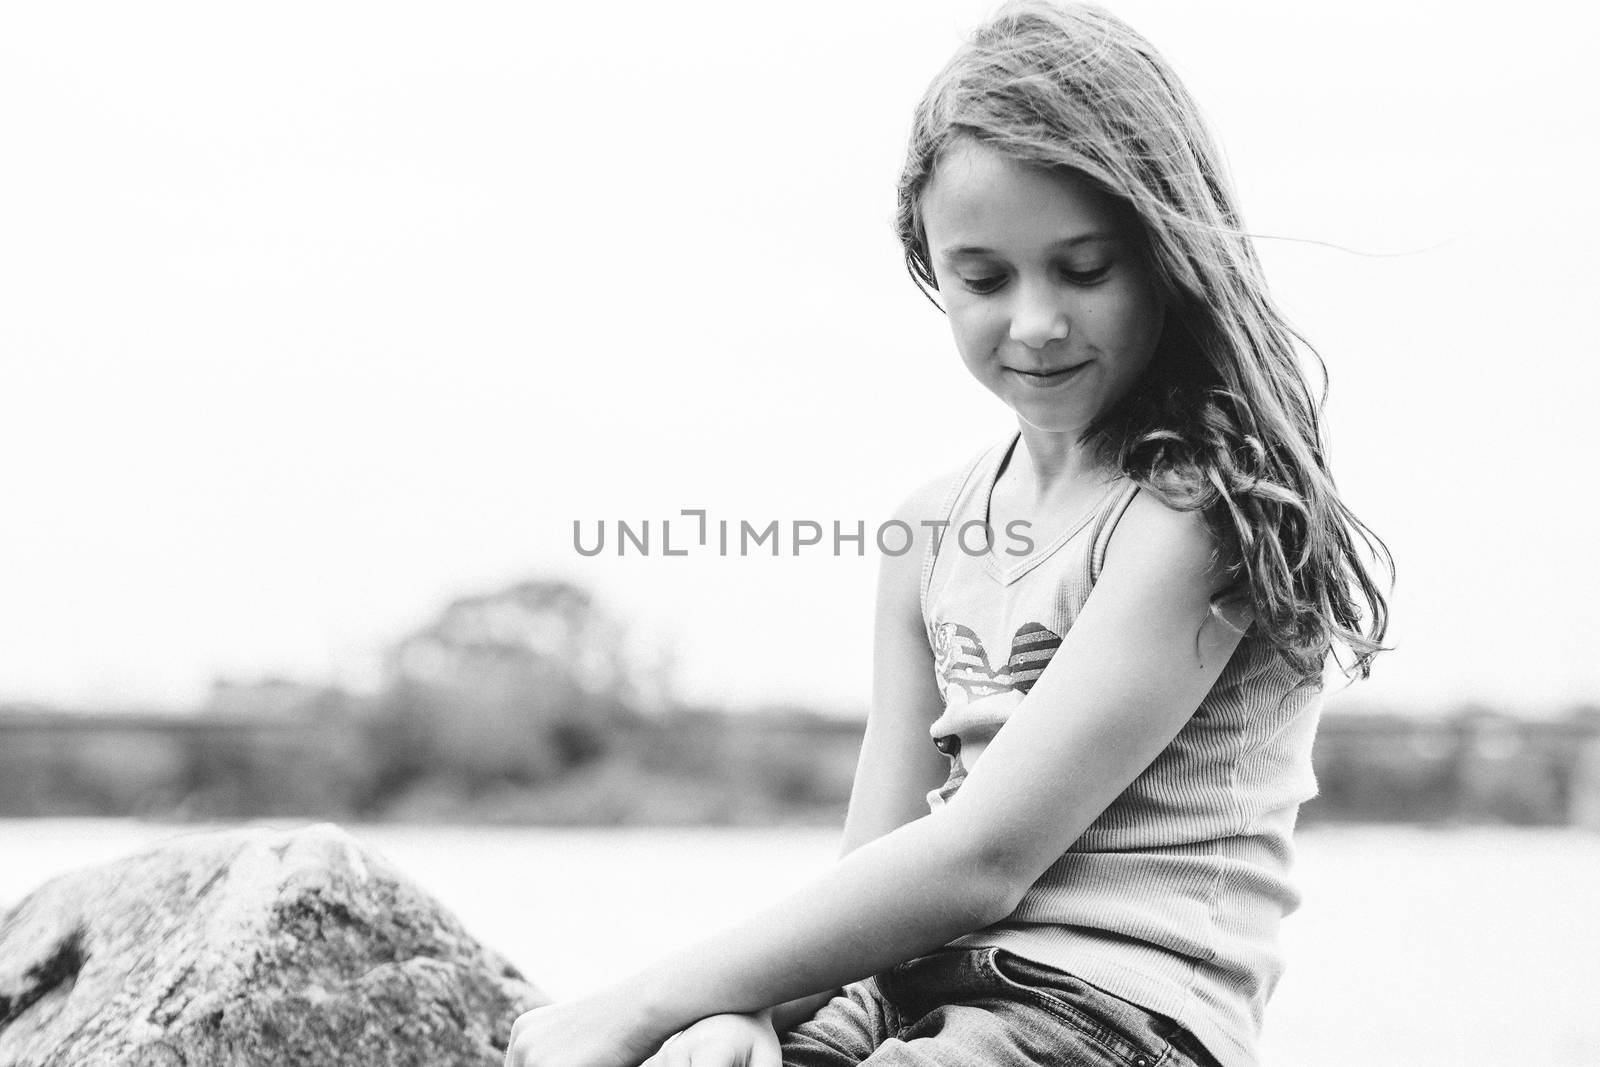 Girl daydreaming sitting on a rock by a river in black and white